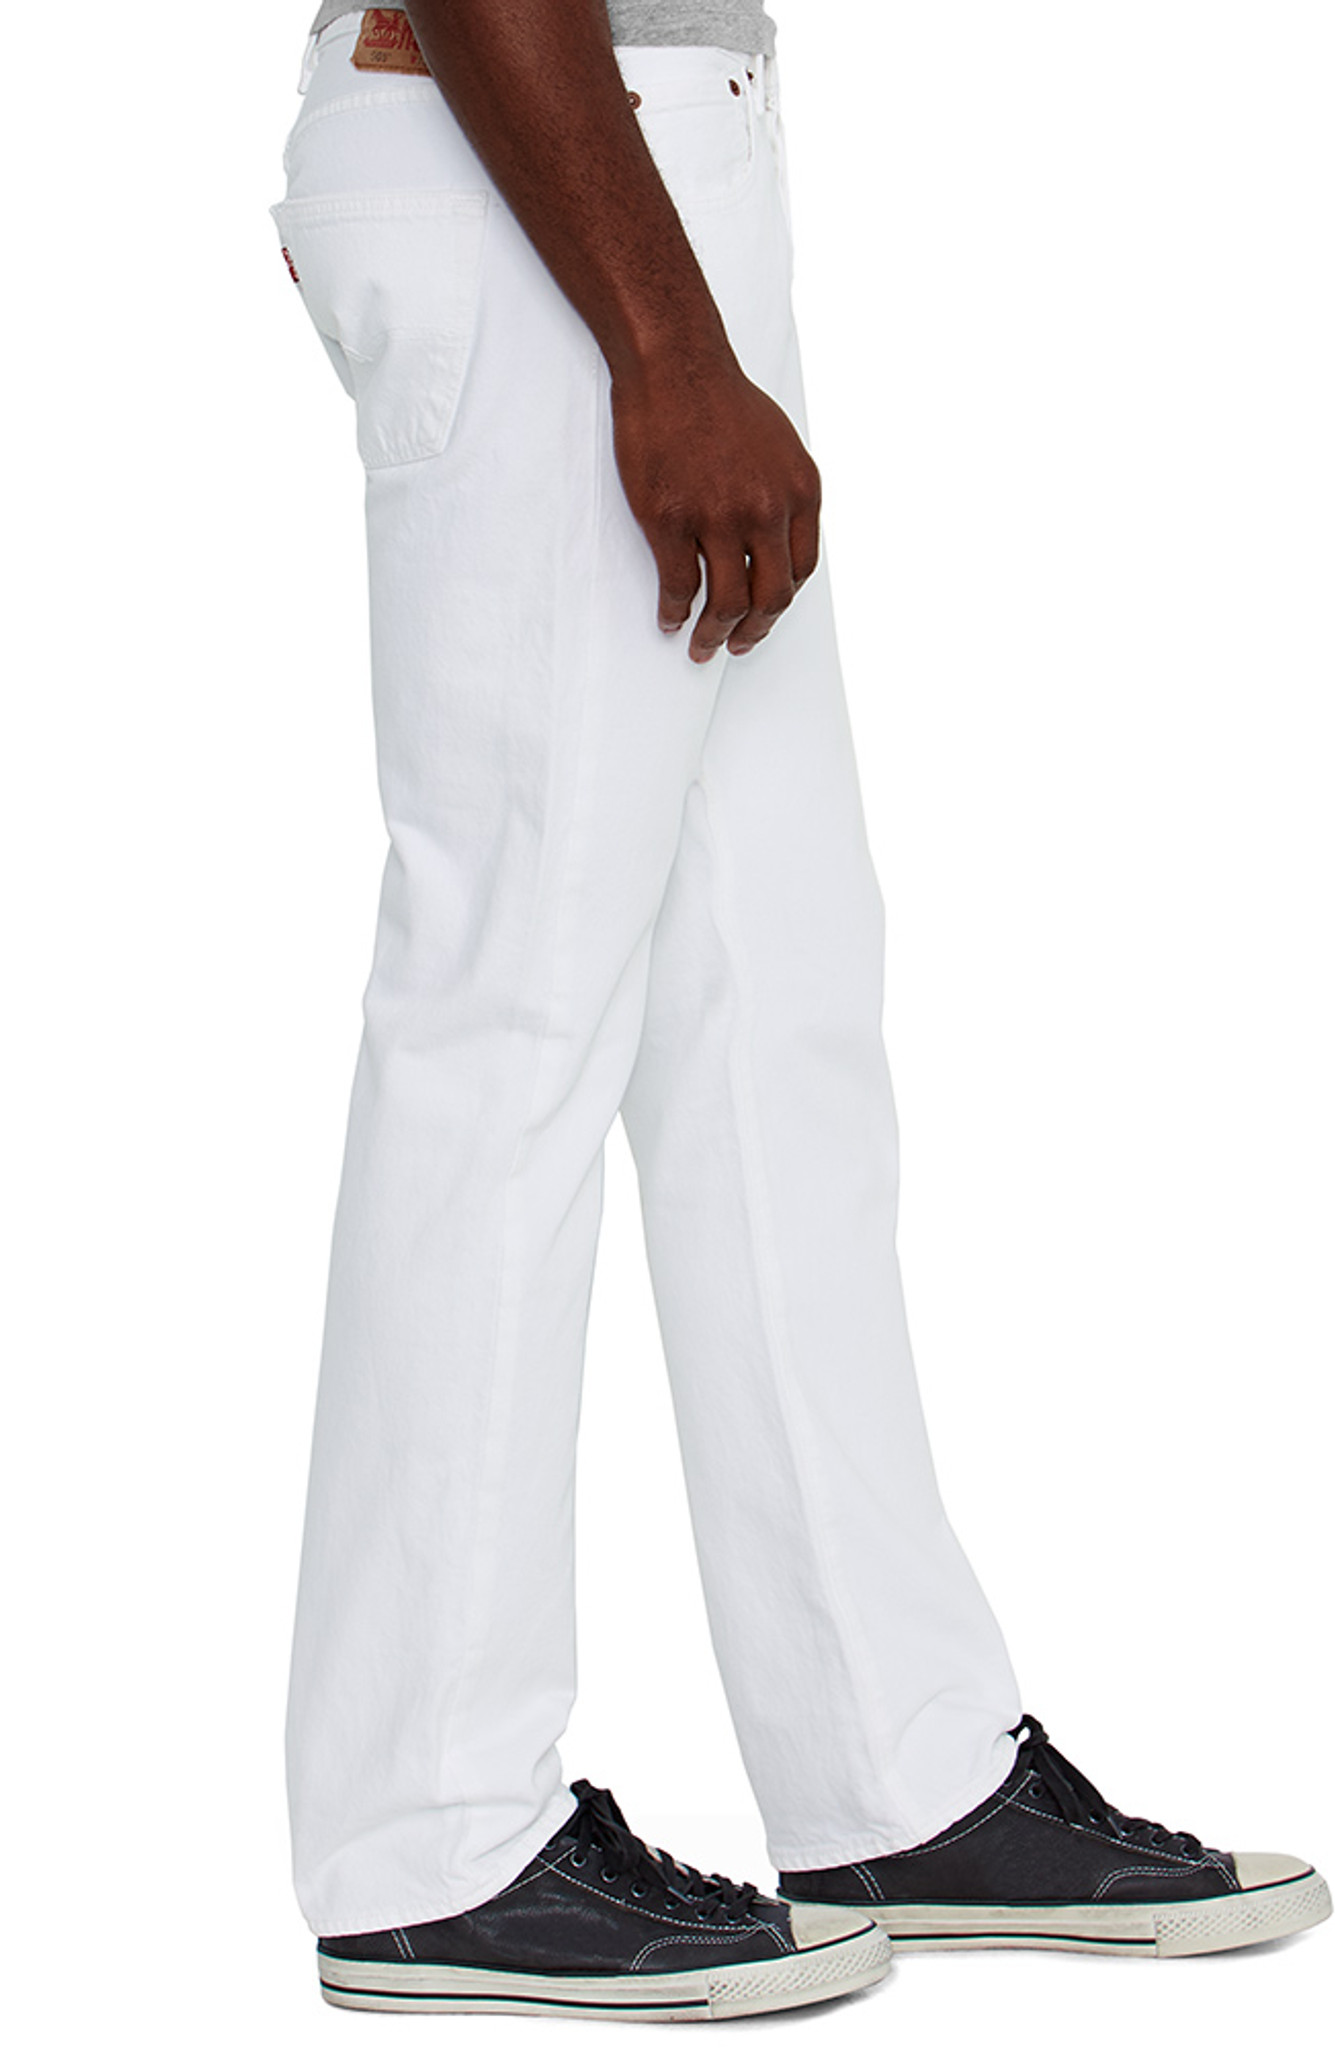 What To Wear With White Jeans - Men's White Jeans Outfits & Style Guide |  Michael 84